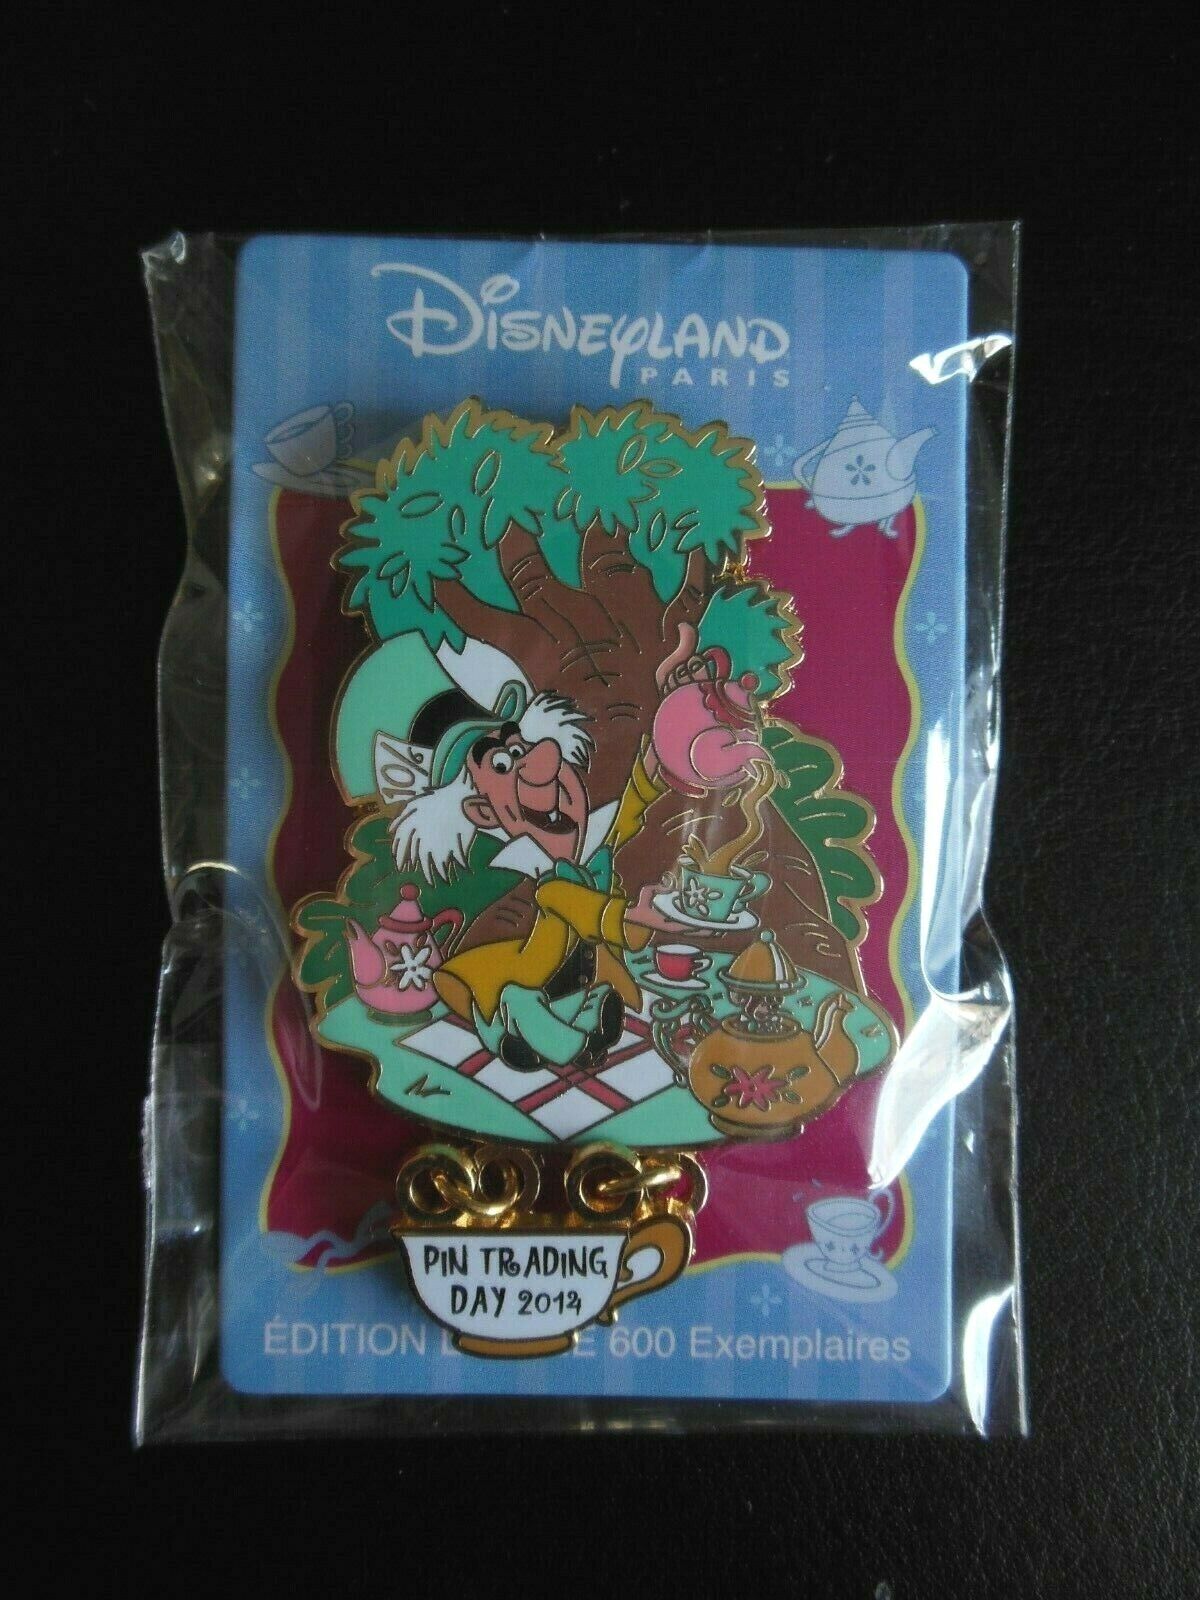 Disney pin Paris Number 001 of 600 Pin trading day 2014 Mad hatter Alice Tea